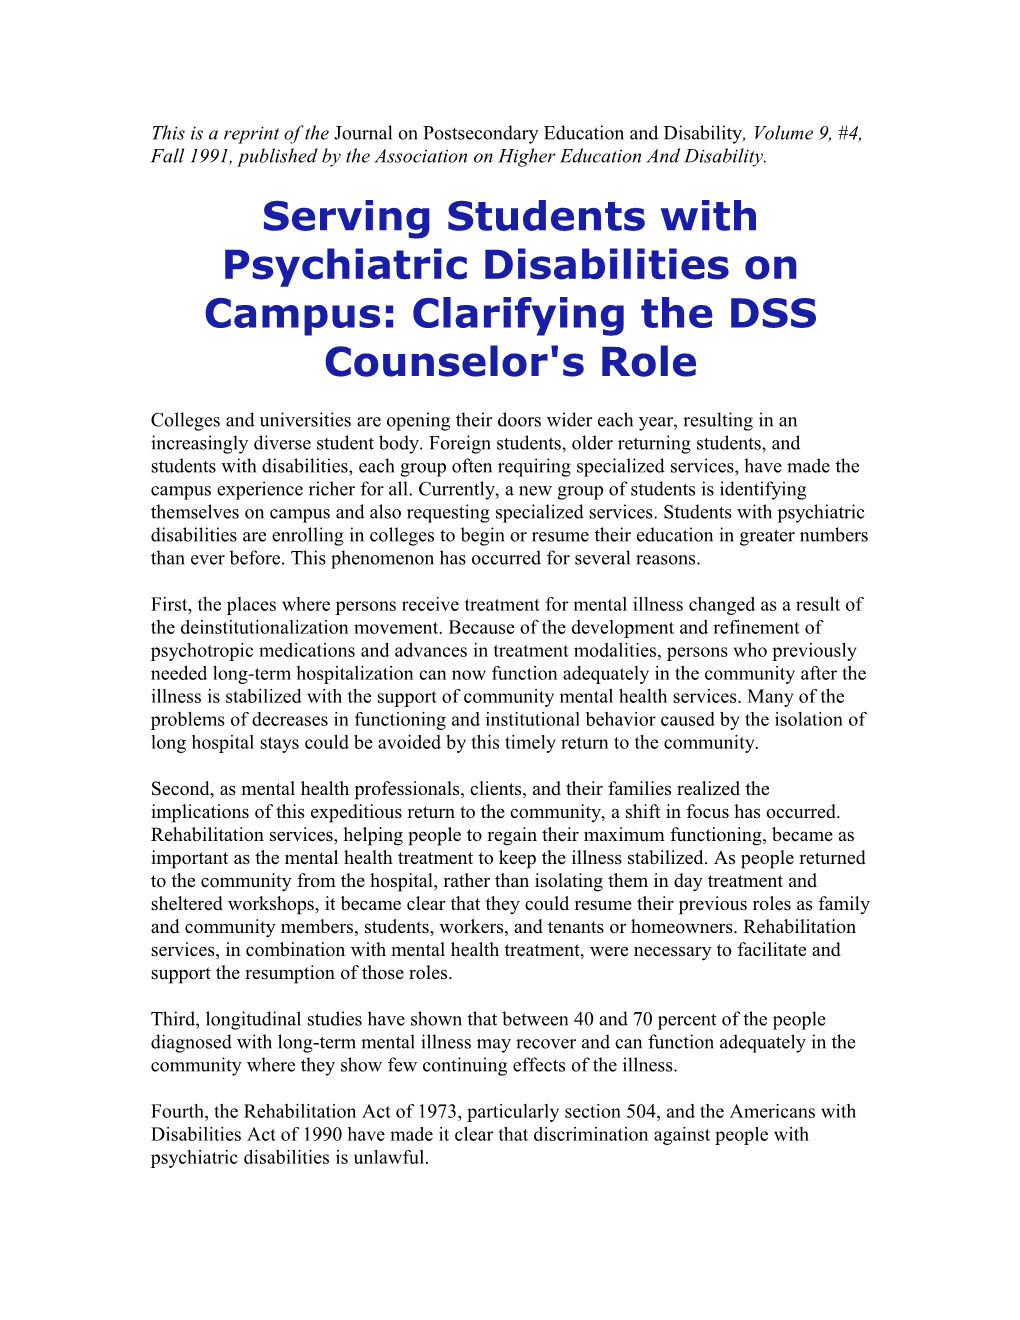 Serving Students with Psychiatric Disabilities on Campus: Clarifying the DSS Counselor's Role